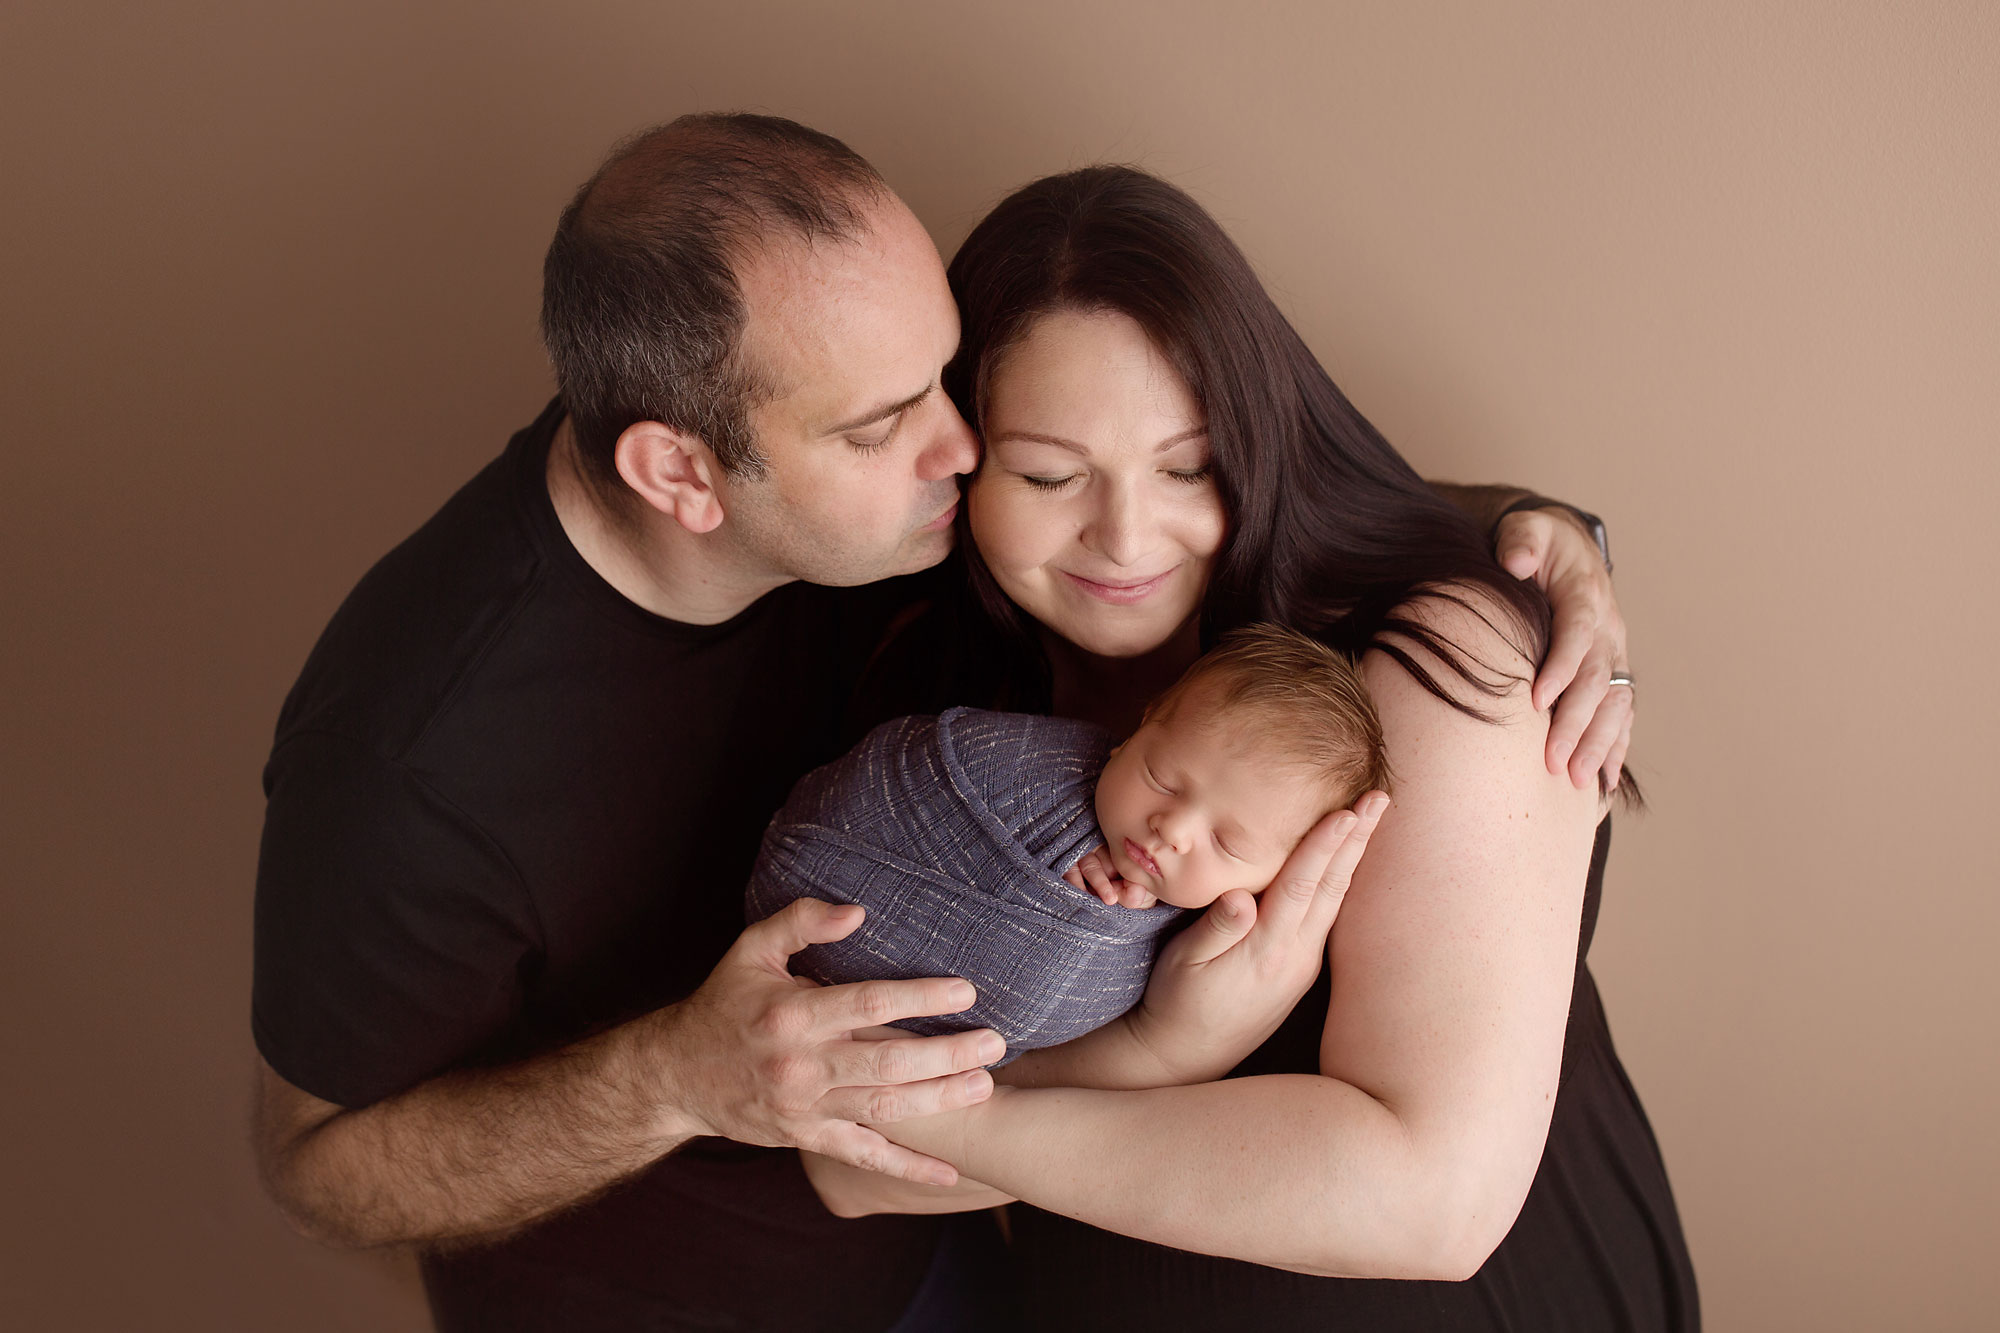 family photo session near me nj, dad kissing mom while they hold new baby